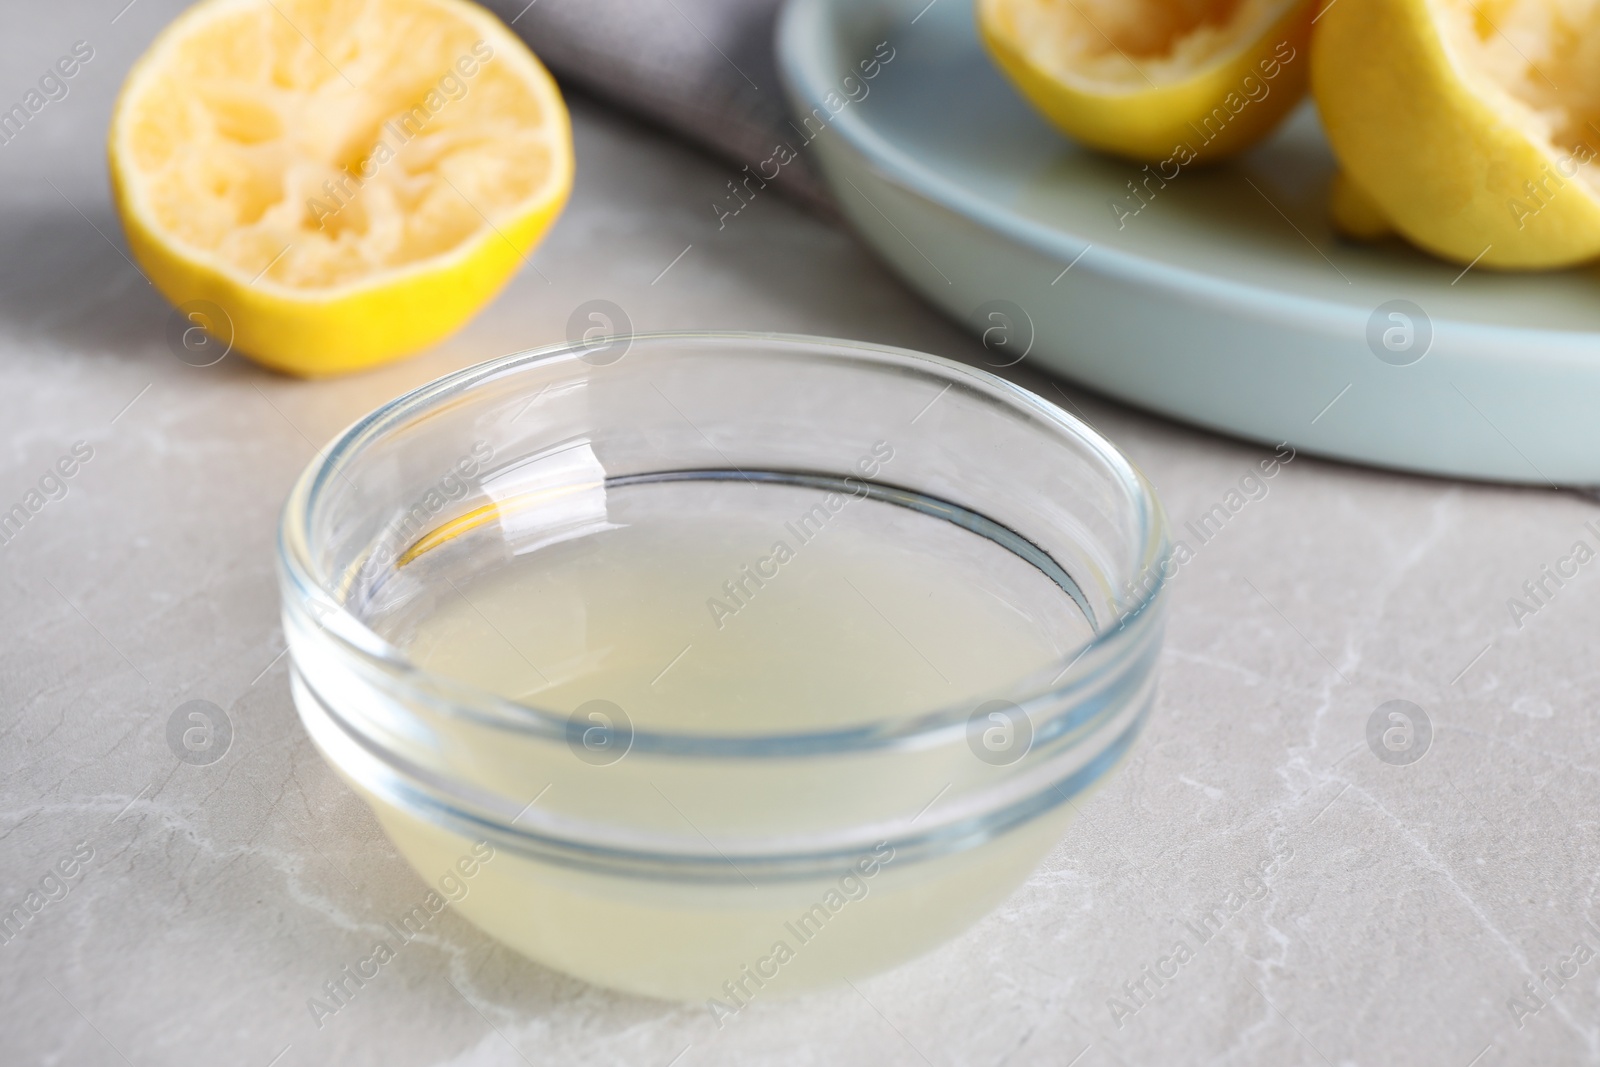 Photo of Freshly squeezed lemon juice in glass bowl on grey marble table